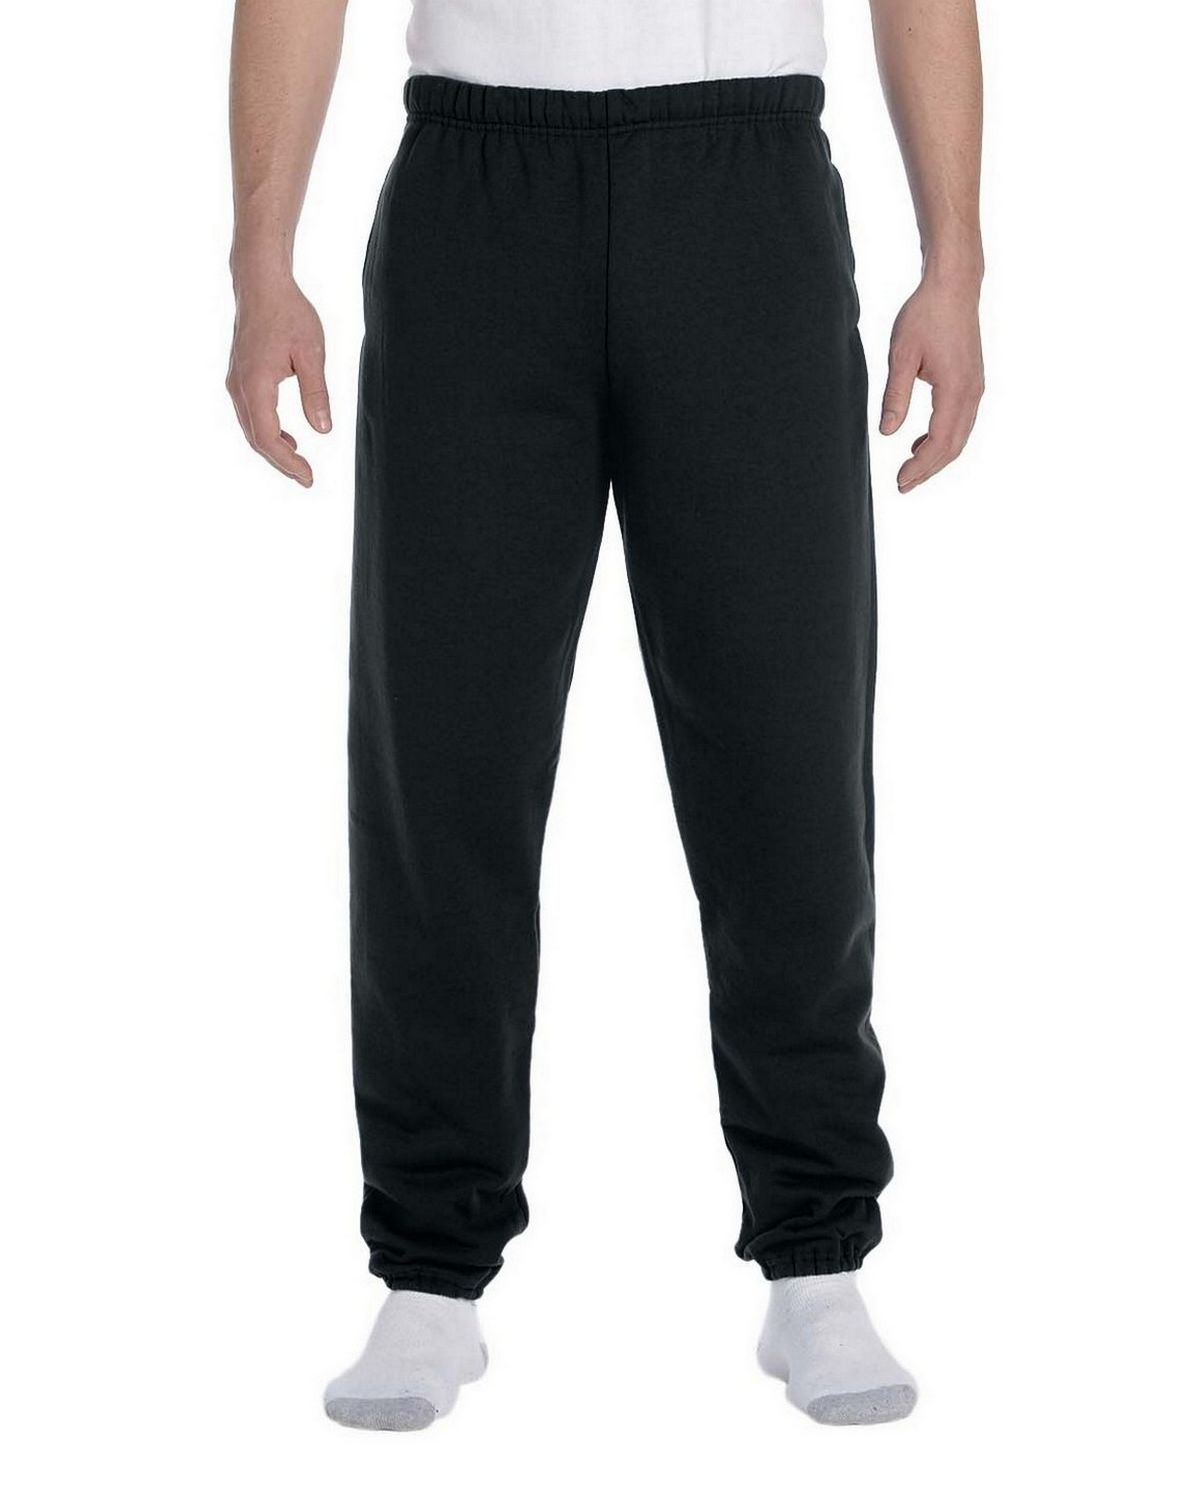 Duofold Men's Mid Weight Wicking Thermal Pant Large Black 1